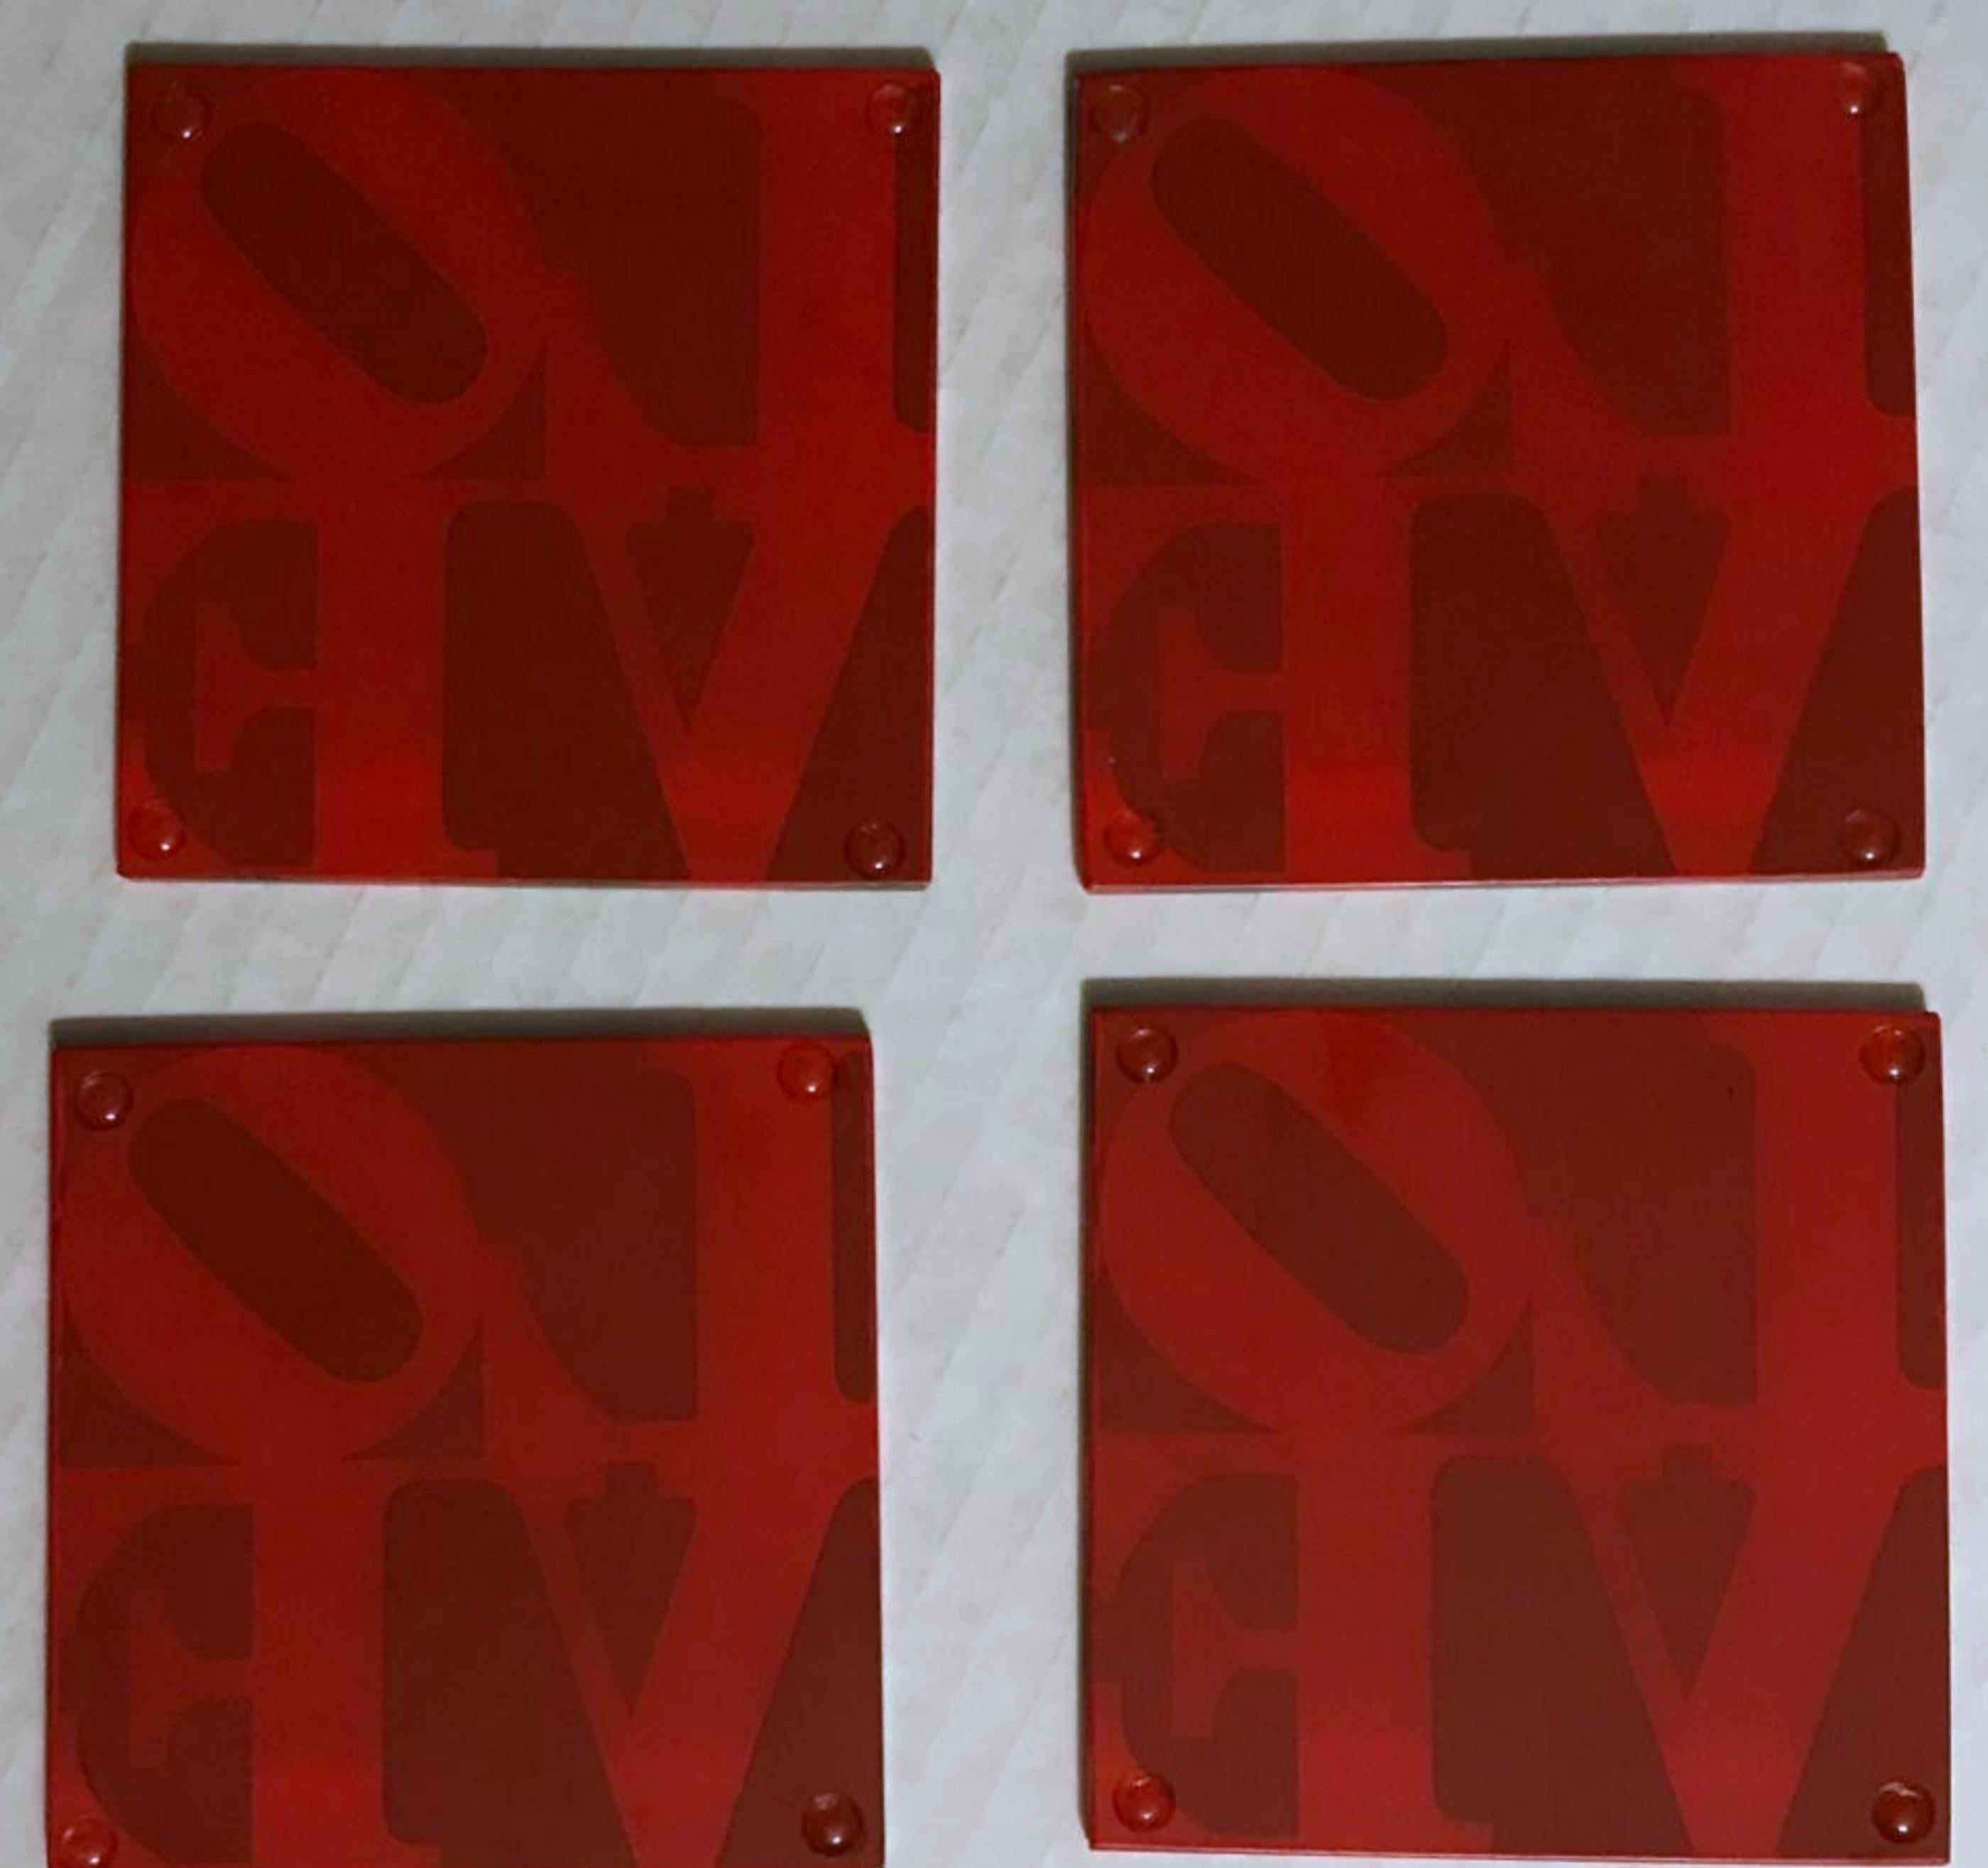 Robert Indiana
Set of Four Glass Coasters, ca. 2011
Silkscreened glass coasters
Sticker label, Accompanied by museum label (shown), not signed
3 1/2 × 3 1/2 × 3/10 inches
Unframed
Measurements apply to each coaster
Created and sold exclusively by